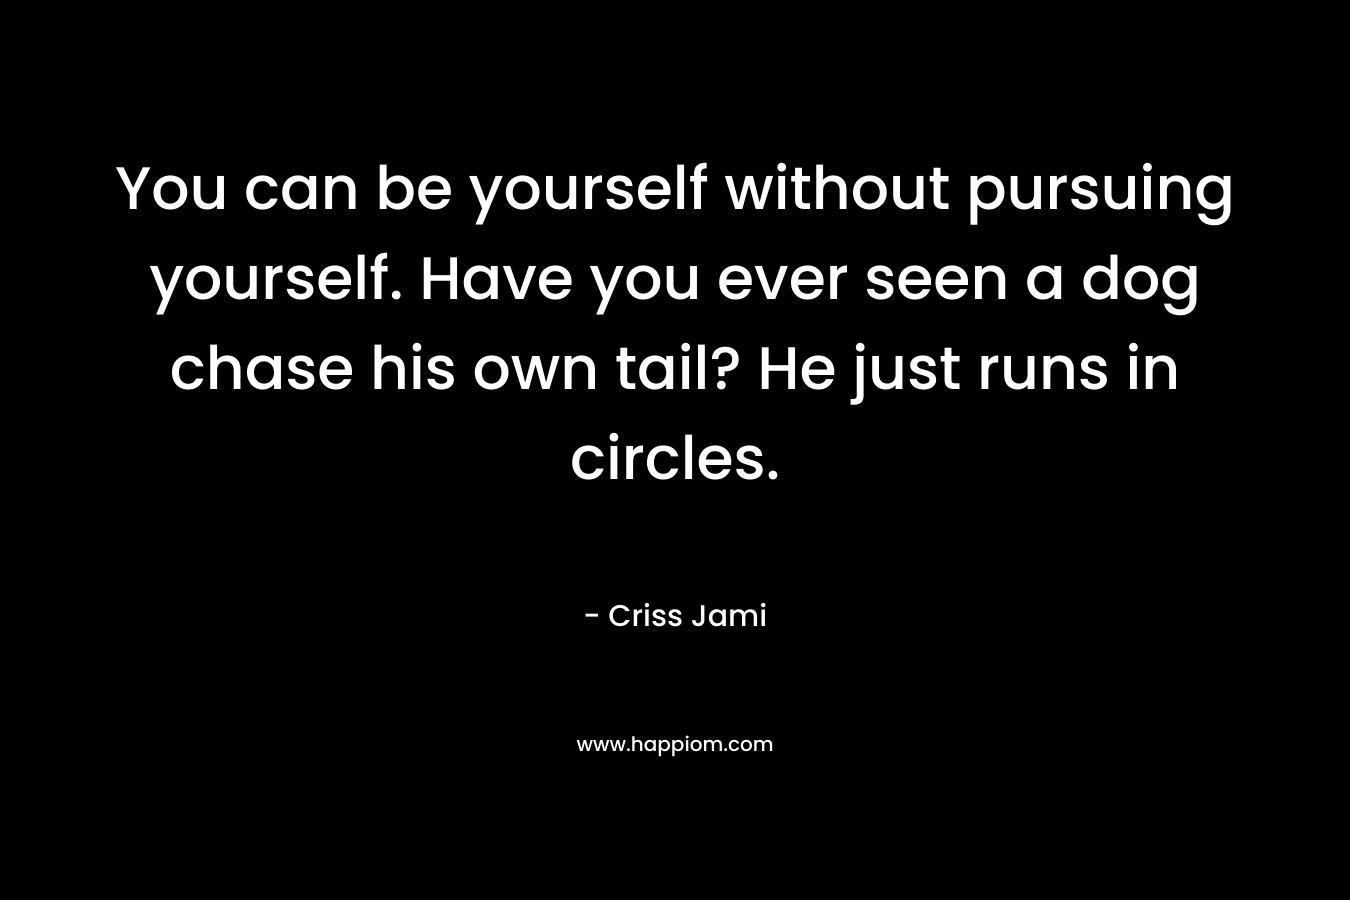 You can be yourself without pursuing yourself. Have you ever seen a dog chase his own tail? He just runs in circles. – Criss Jami